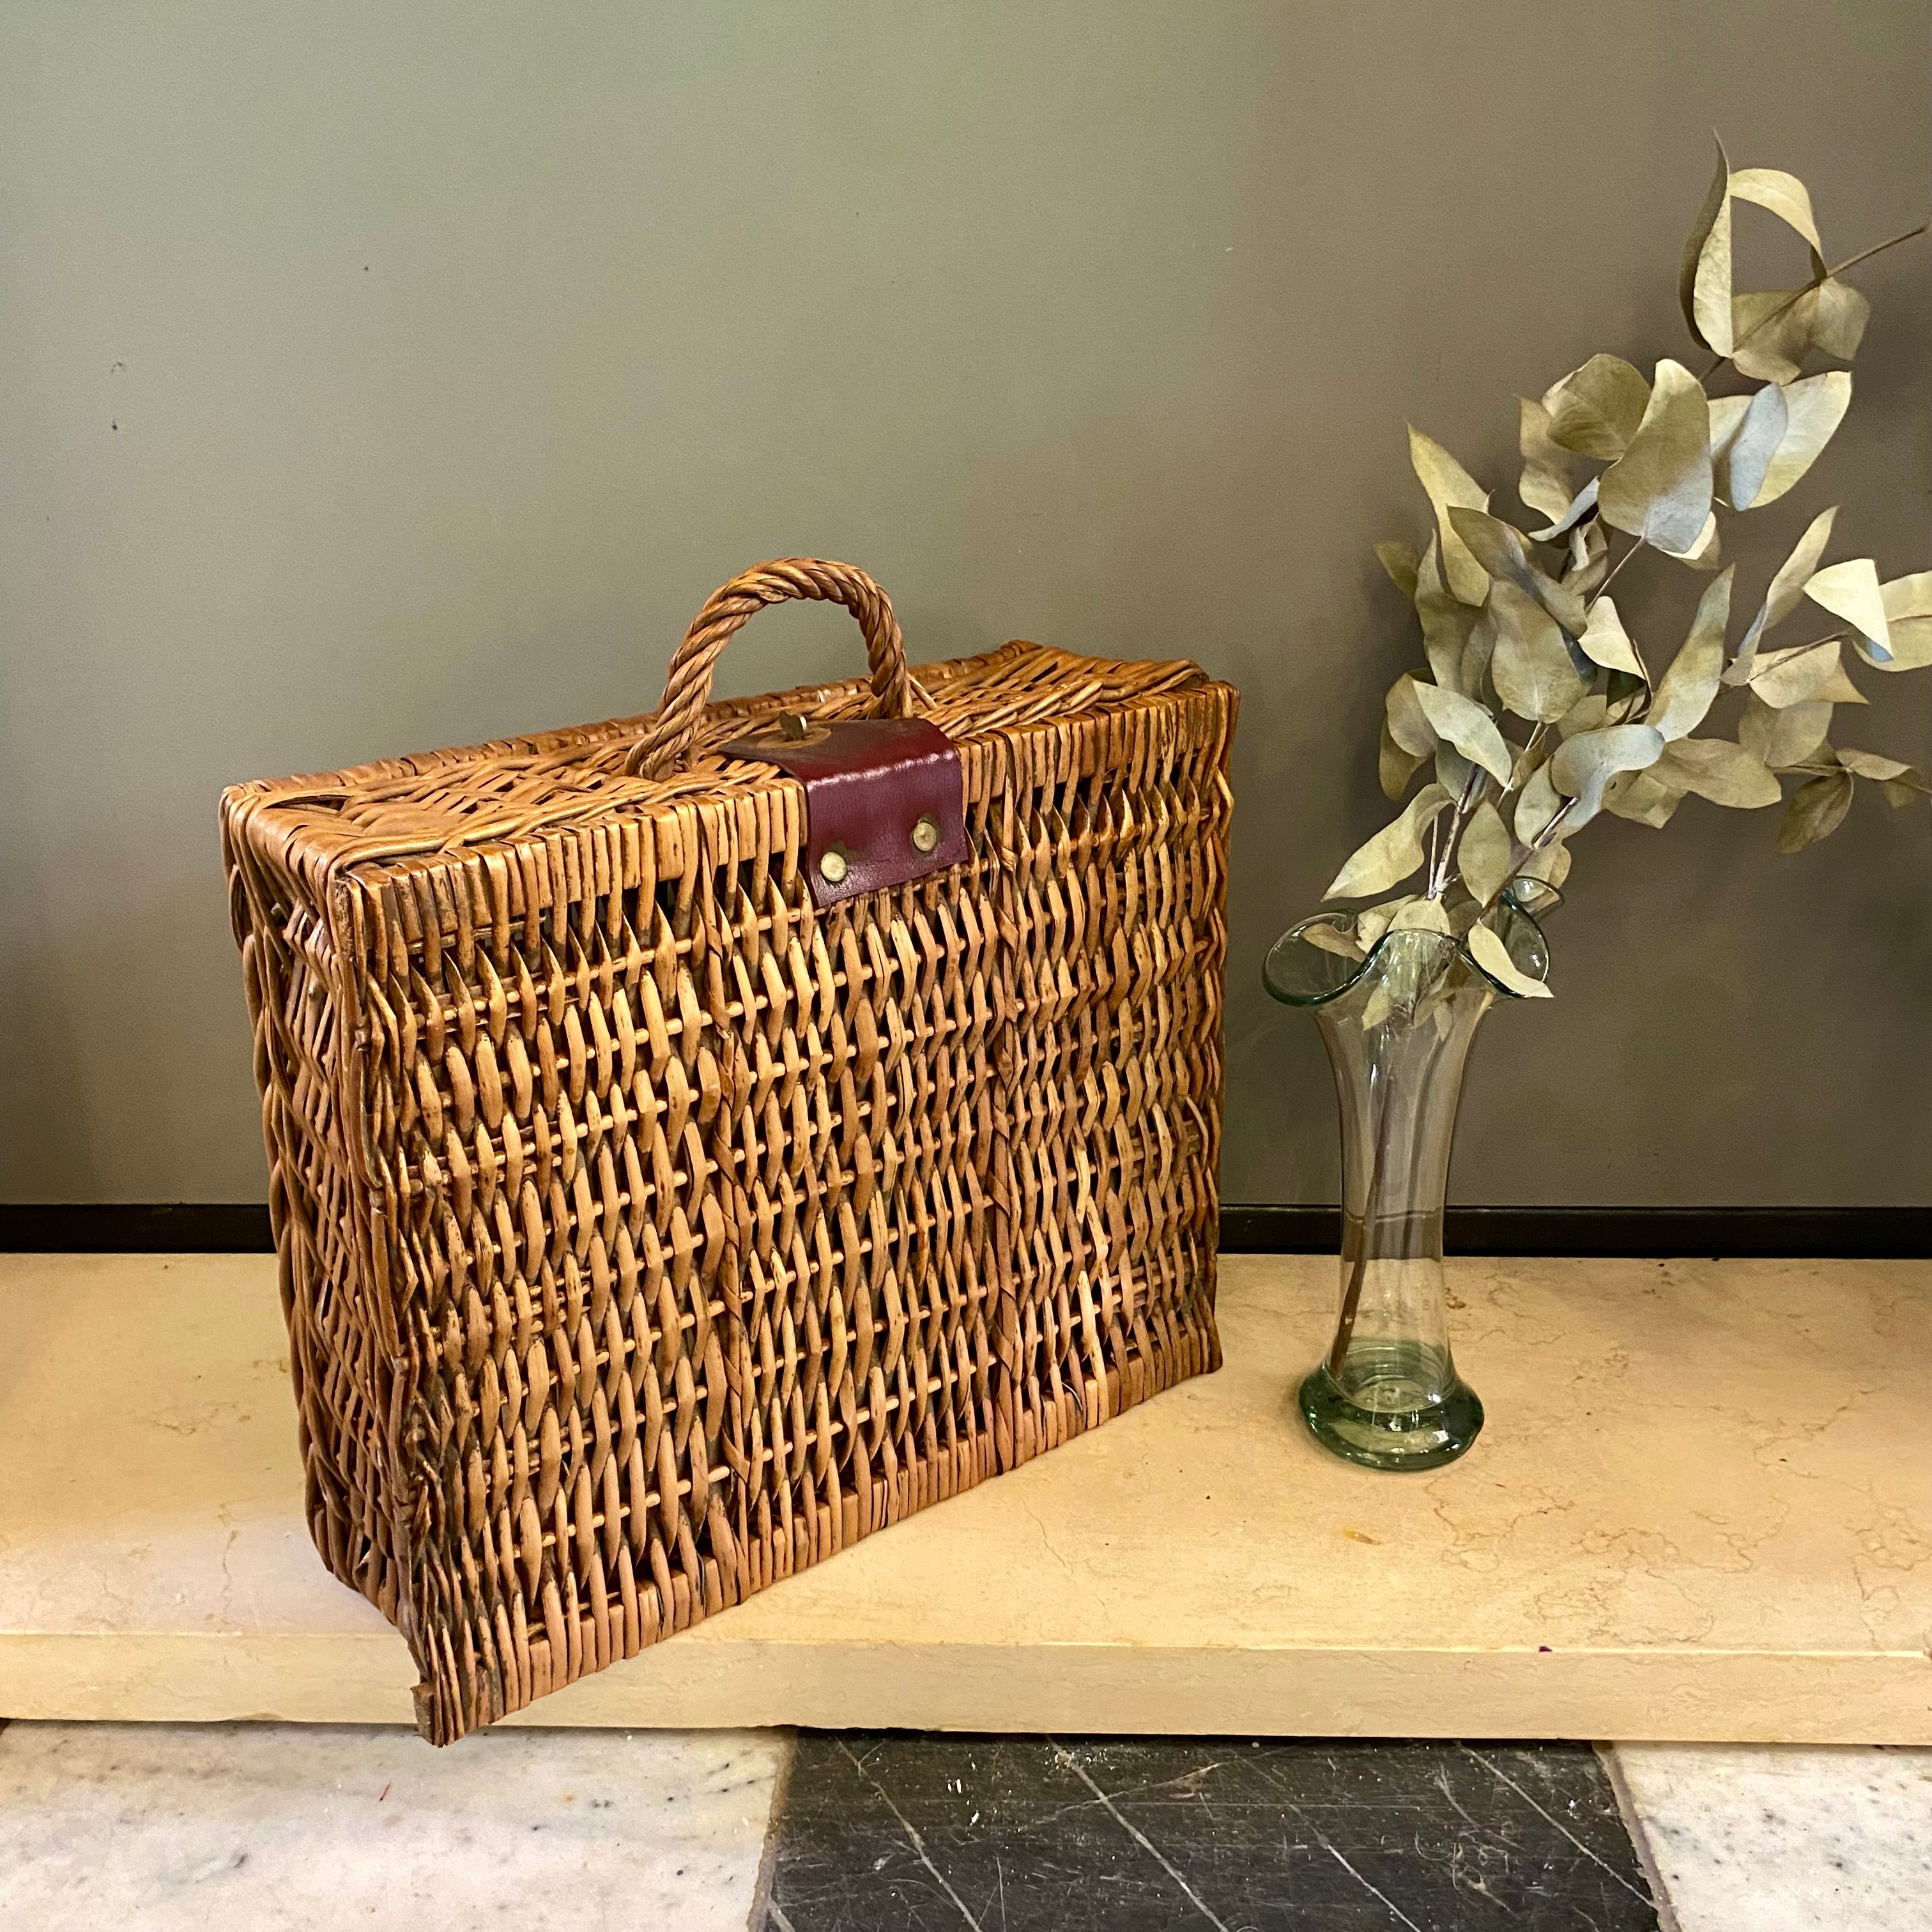 Sweet Vintage Wicker and Leather Clasp Picnic Basket - SOLD